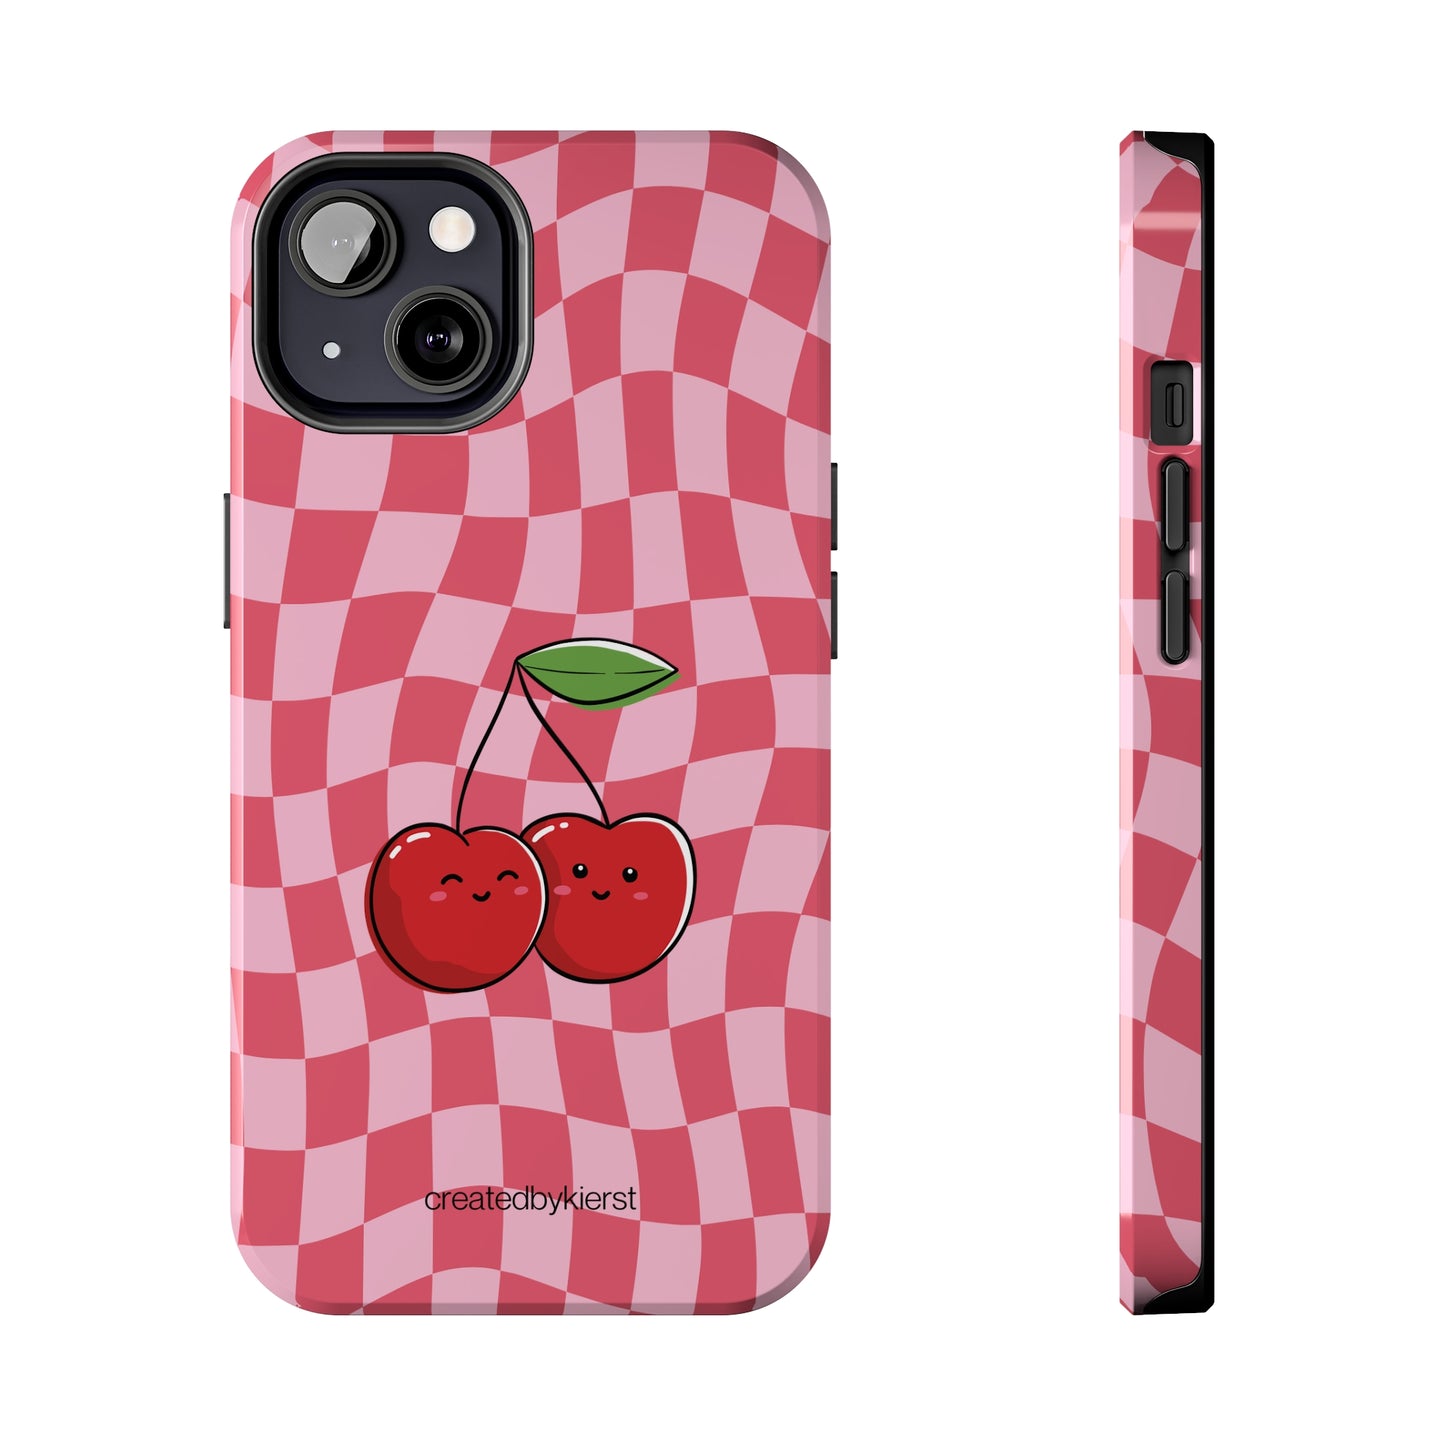 Animated Cherries and Pink Wavy Checkers iPhone Case